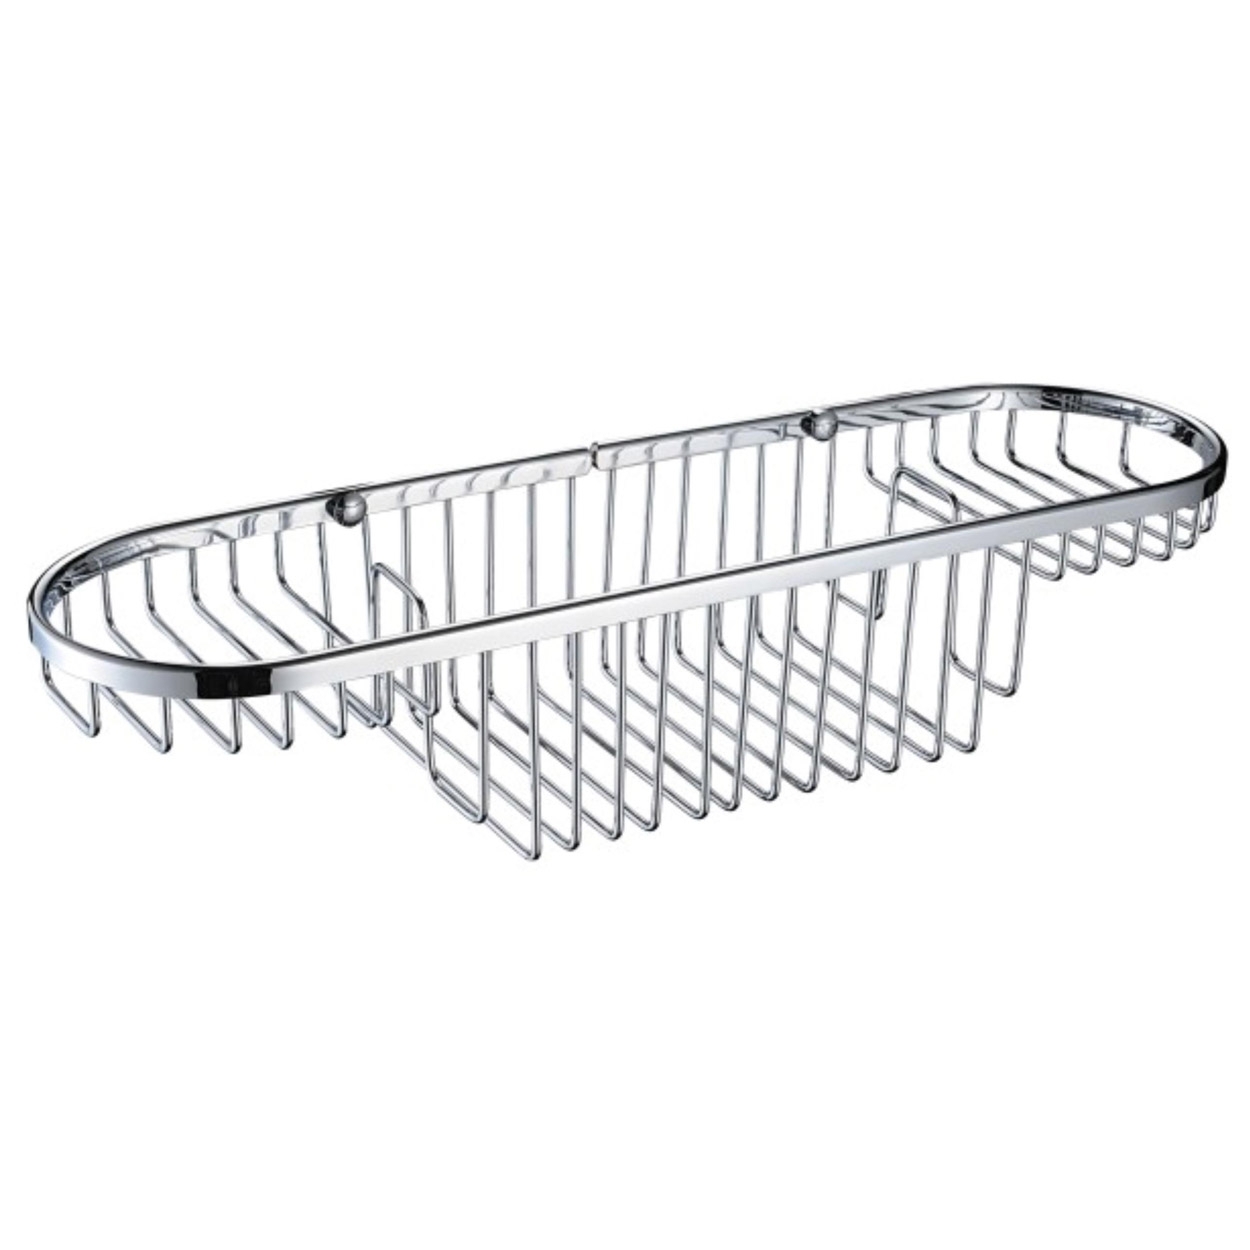 Bristan Large Wall Fixed Wire Basket, Chrome 